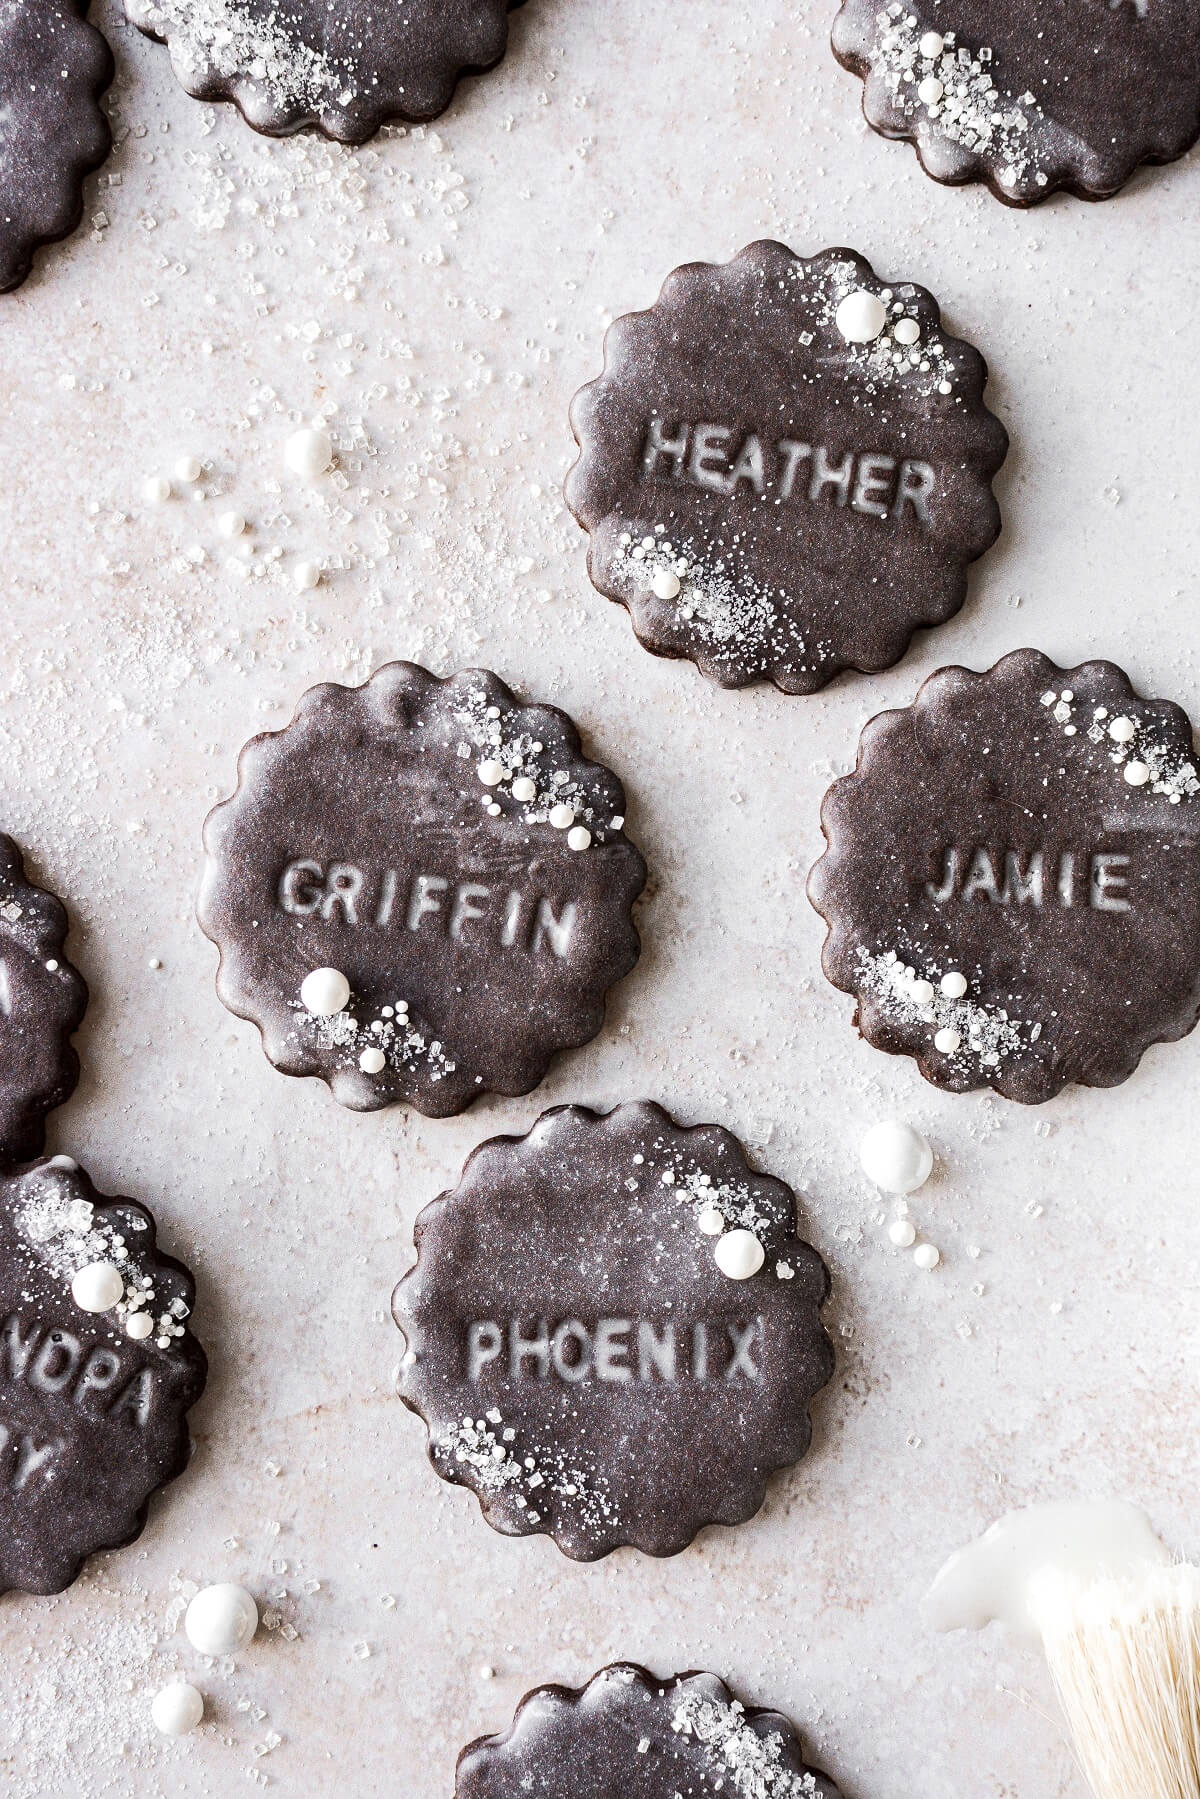 Chocolate cookies stamped with names and glazed with vanilla icing.